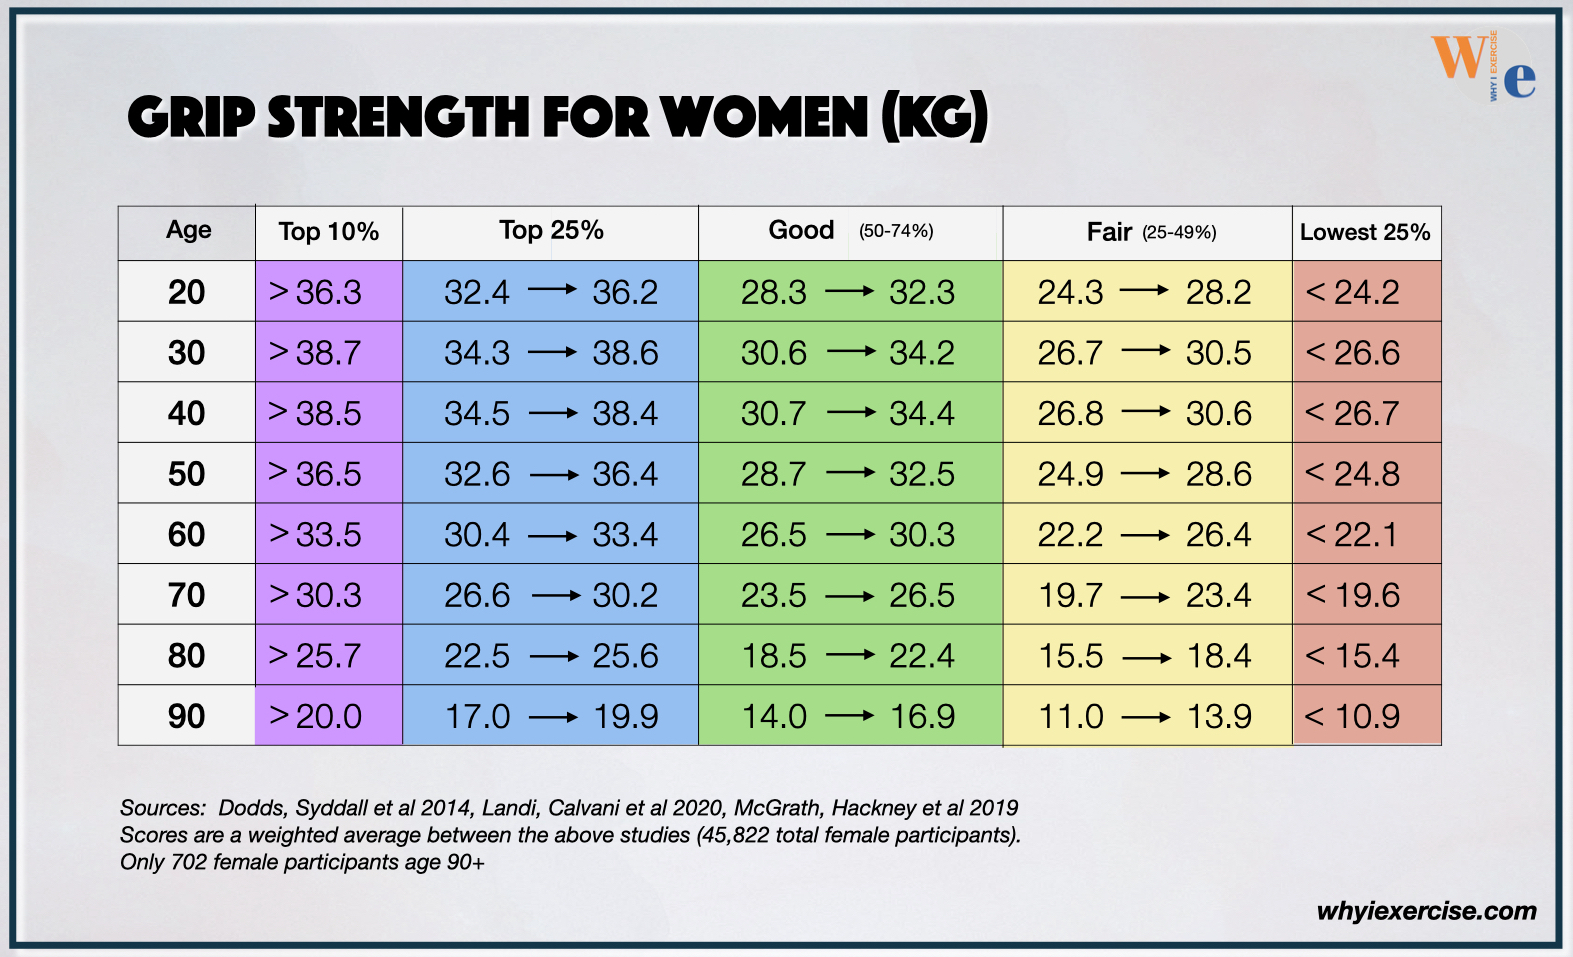 Age-group grip strength standards for women in kg.